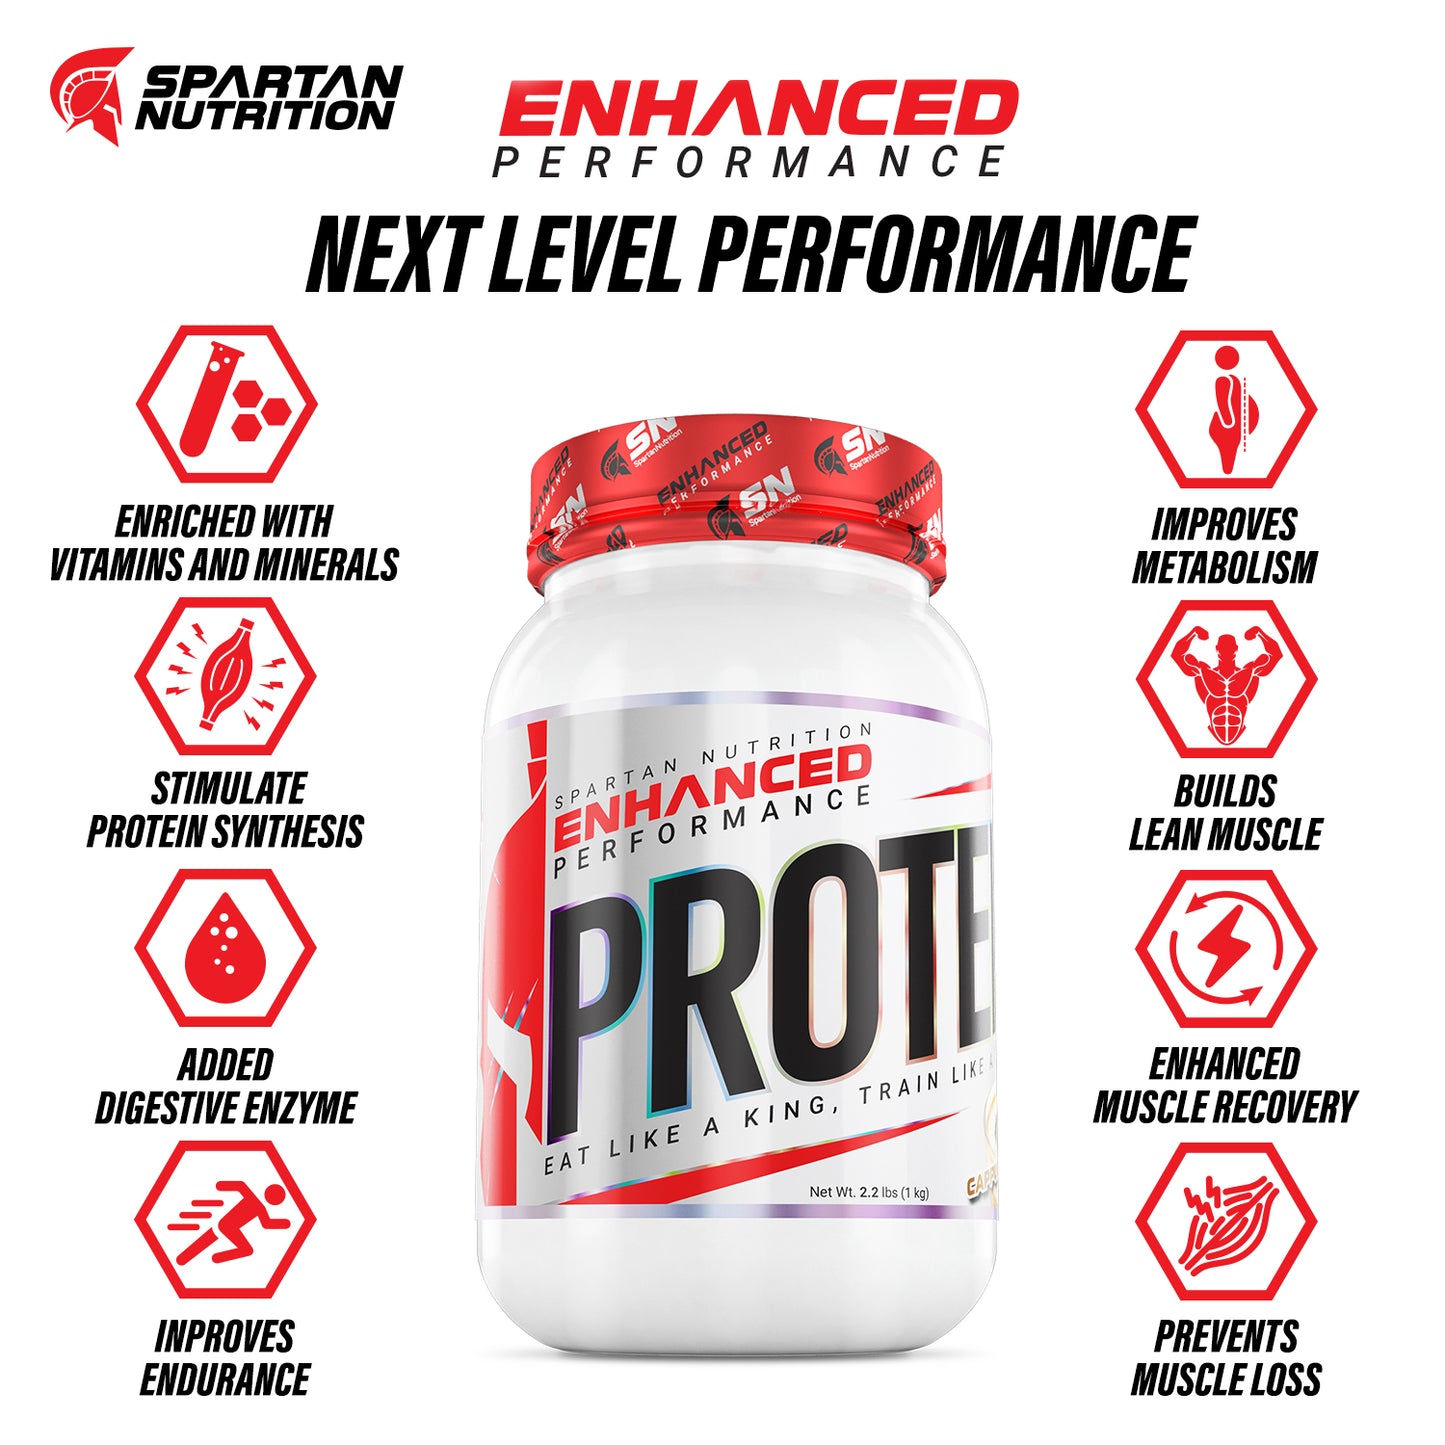 Spartan Nutrition Enhanced Performance Whey Protein – 2.2 LBS, with Complete Amino Acid Profile, Protein - 26g, Low Calories- 112 Kcal, Digezyme – 75mg Per Serving and Zero Added Sugar